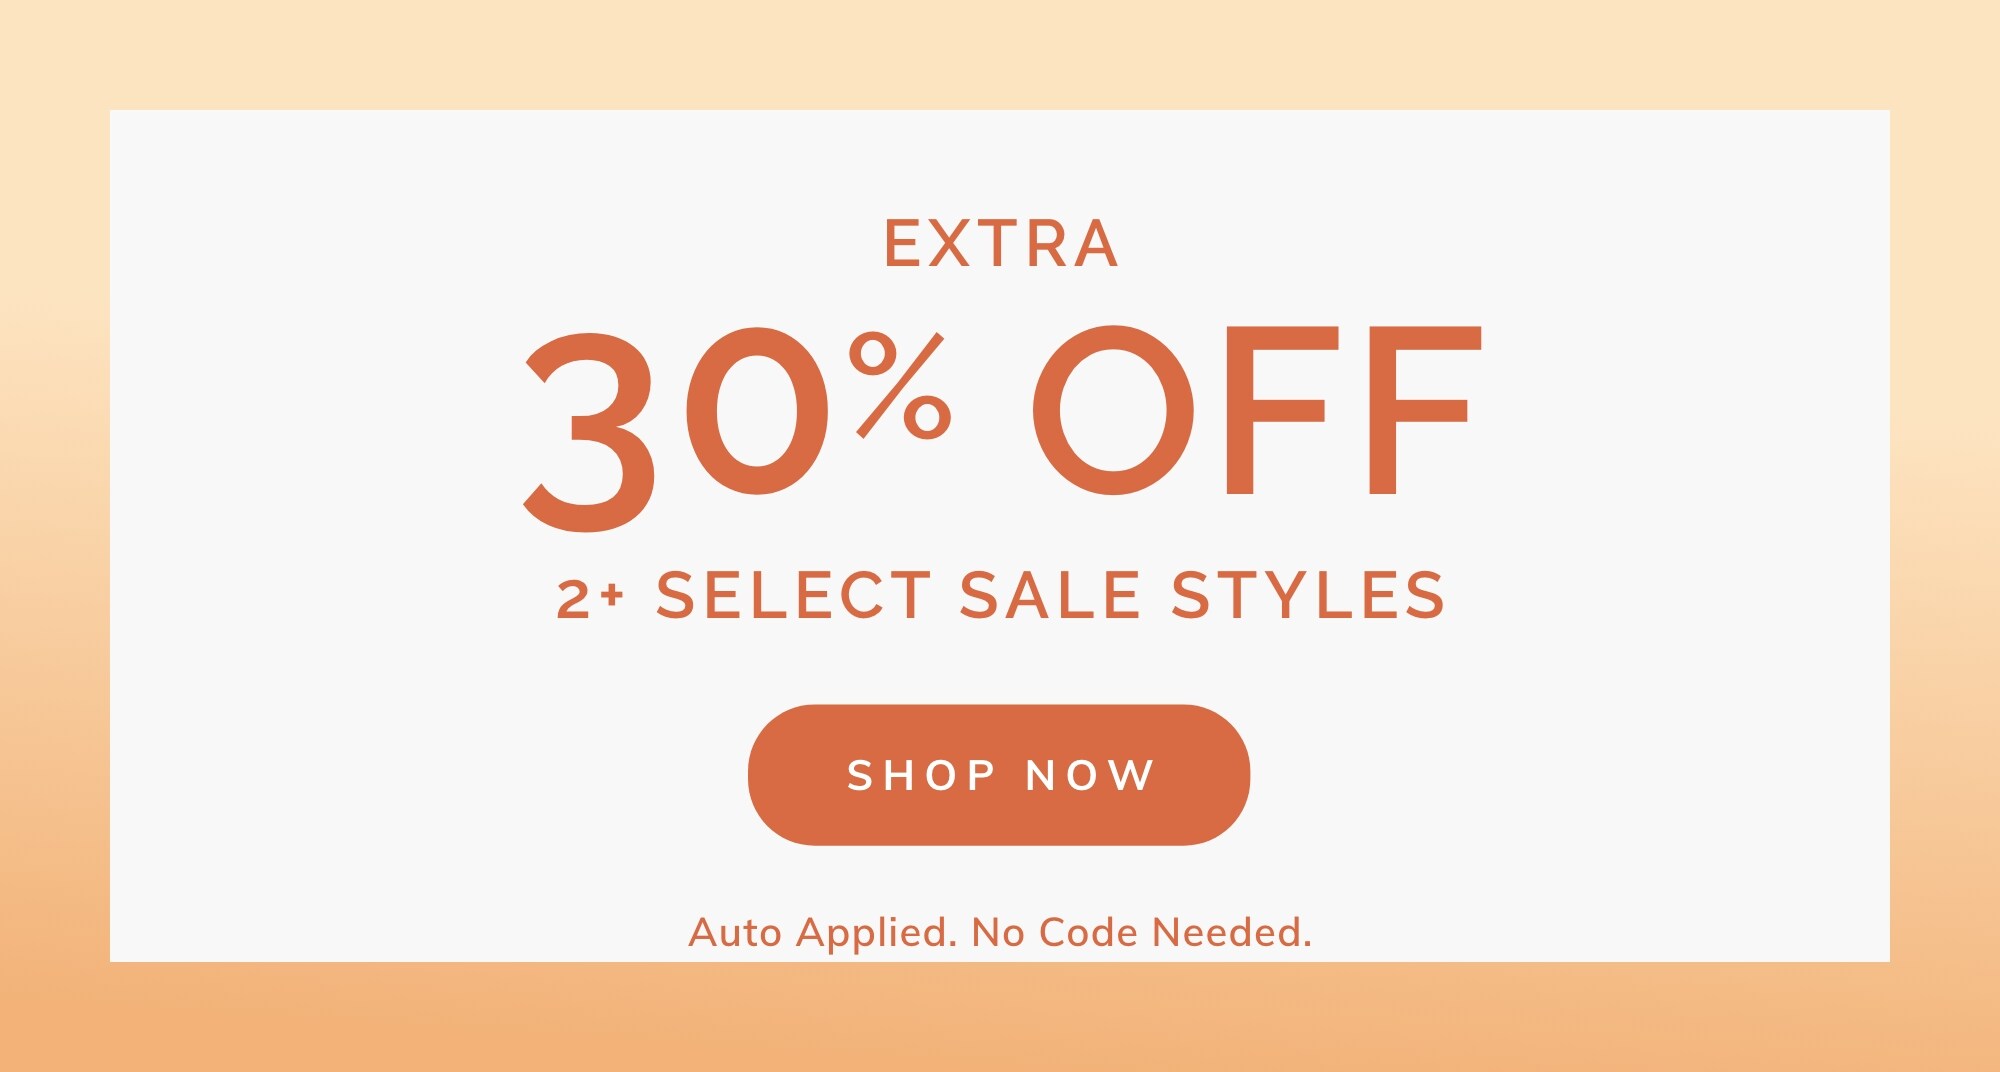 EXTRA 30% Off 2+ SELECT SALE STYLES